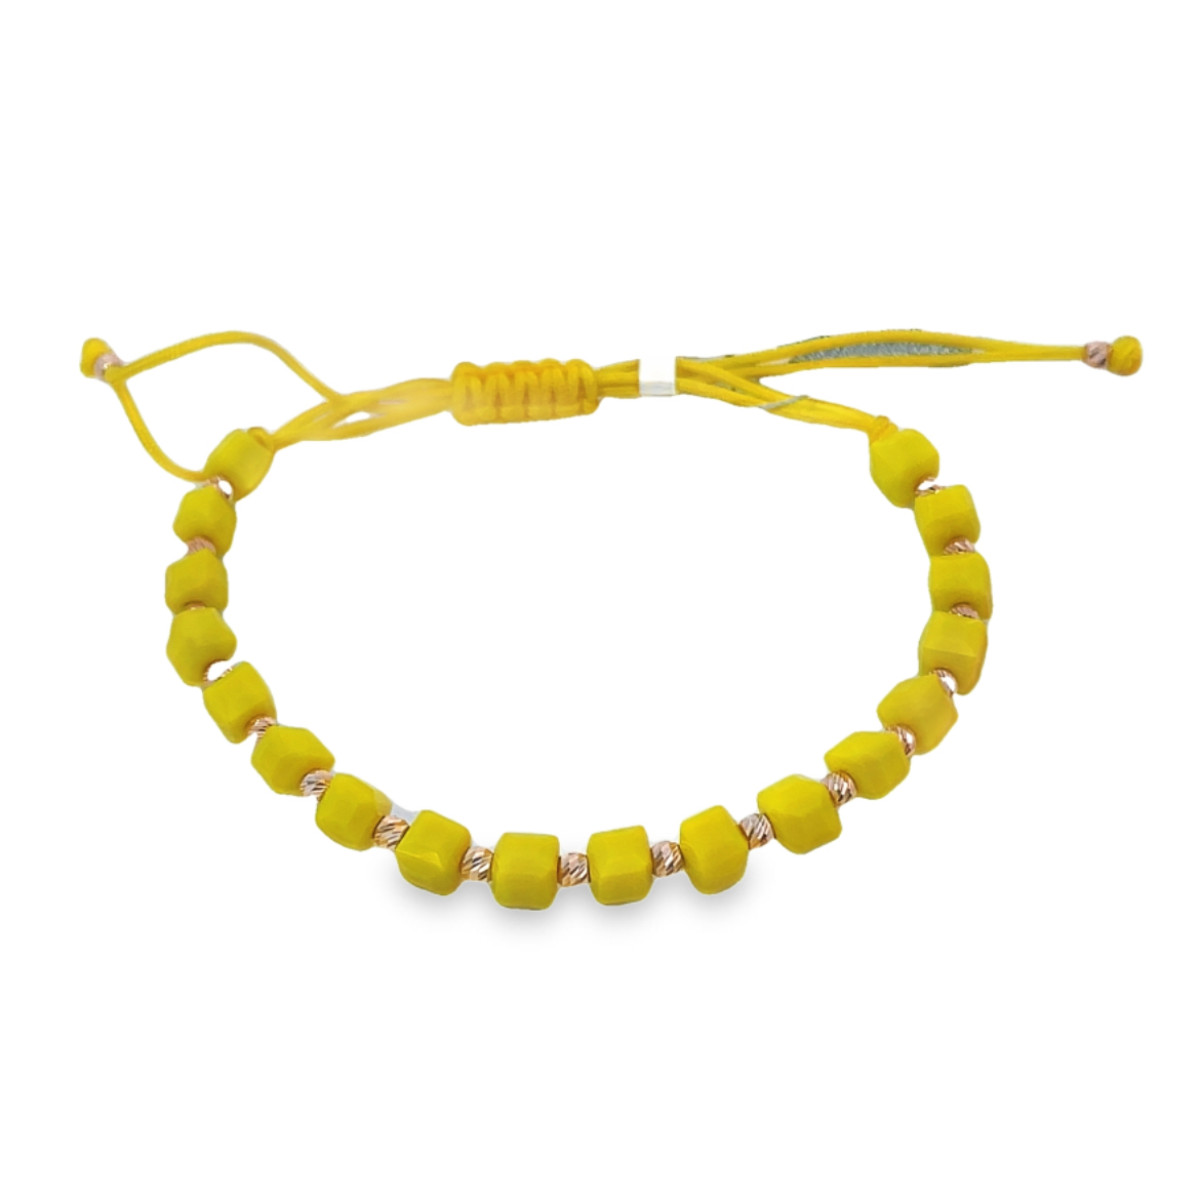  Yellow Beaded Bracelet With Gold Details (527) 1